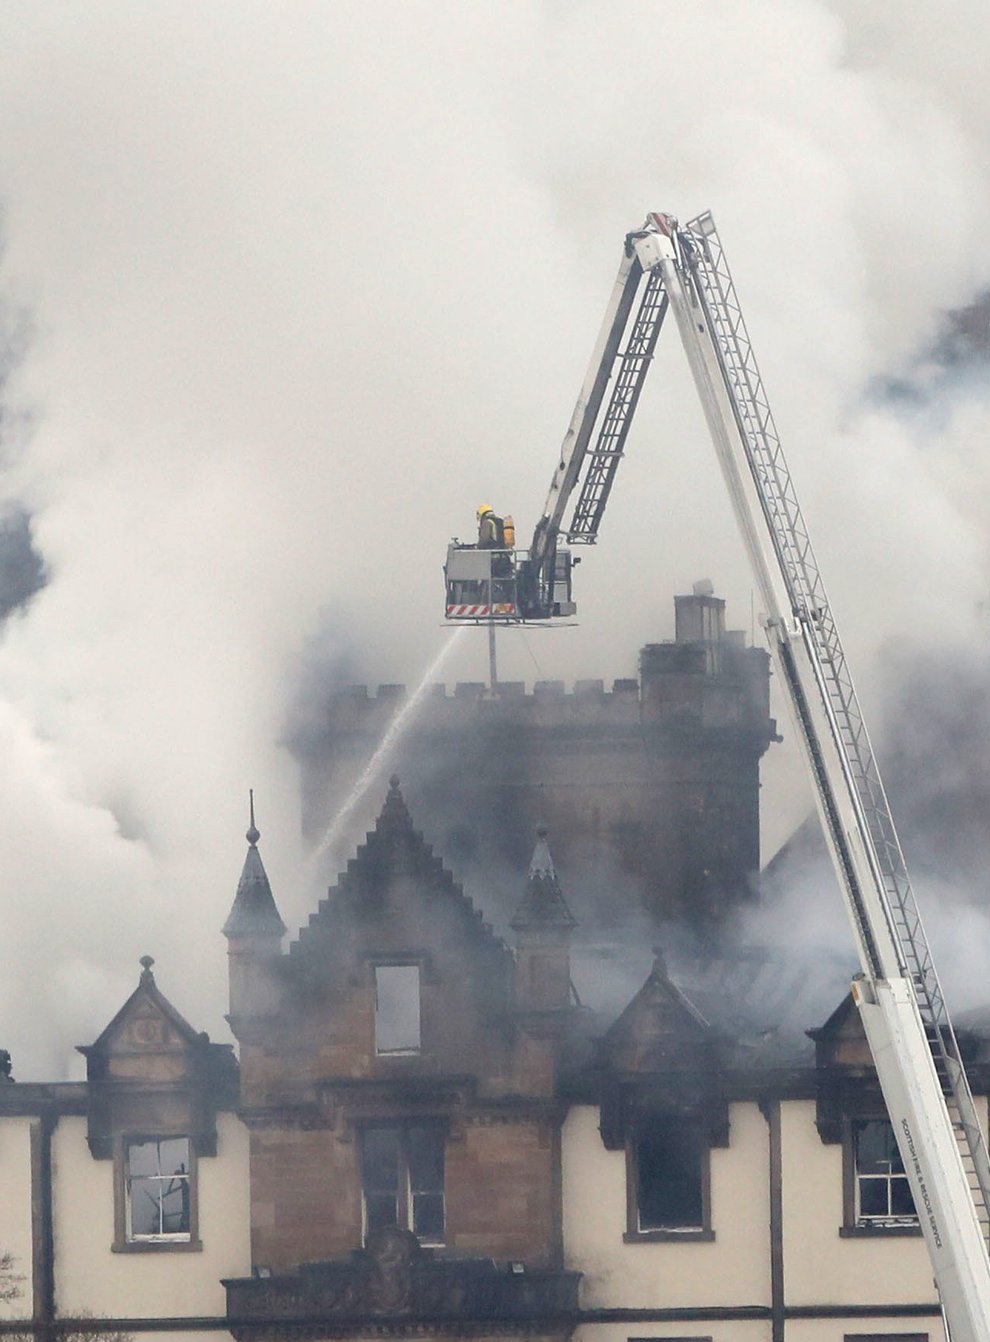 The blaze at Cameron House Hotel happened in December 2017 (Andrew Milligan/PA)